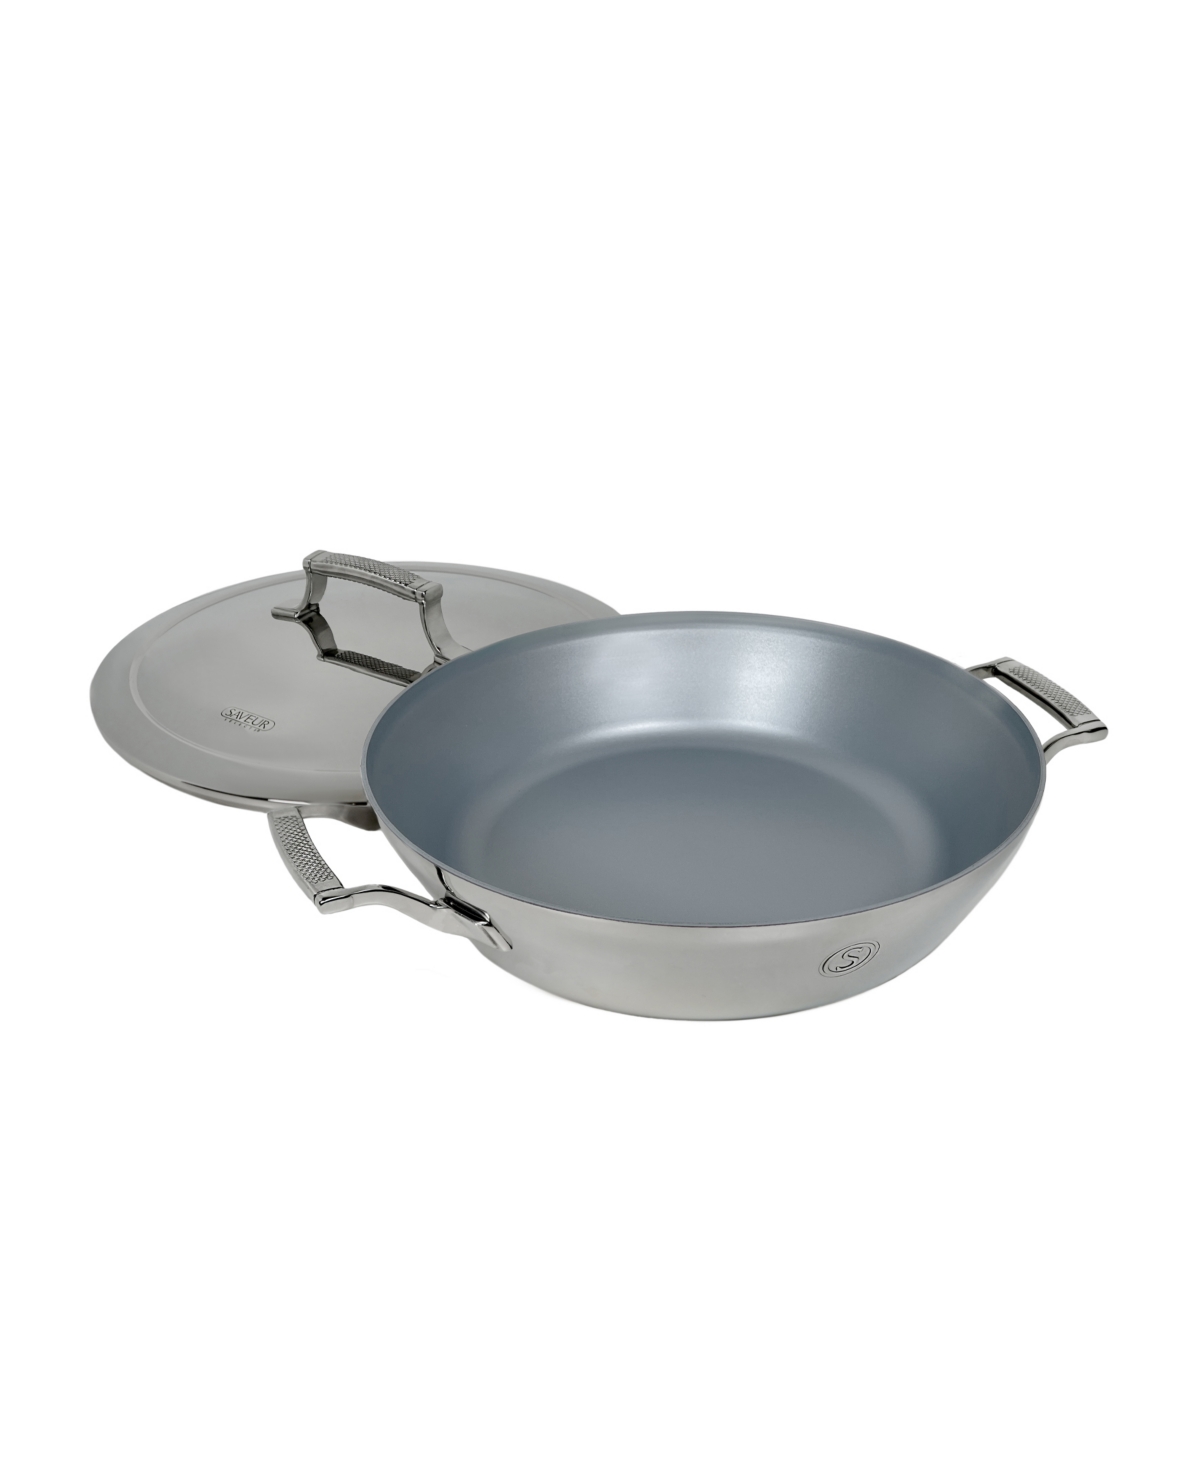 Saveur Selects Tri-ply Stainless Steel 12" Non-stick Everyday Pan With Lid